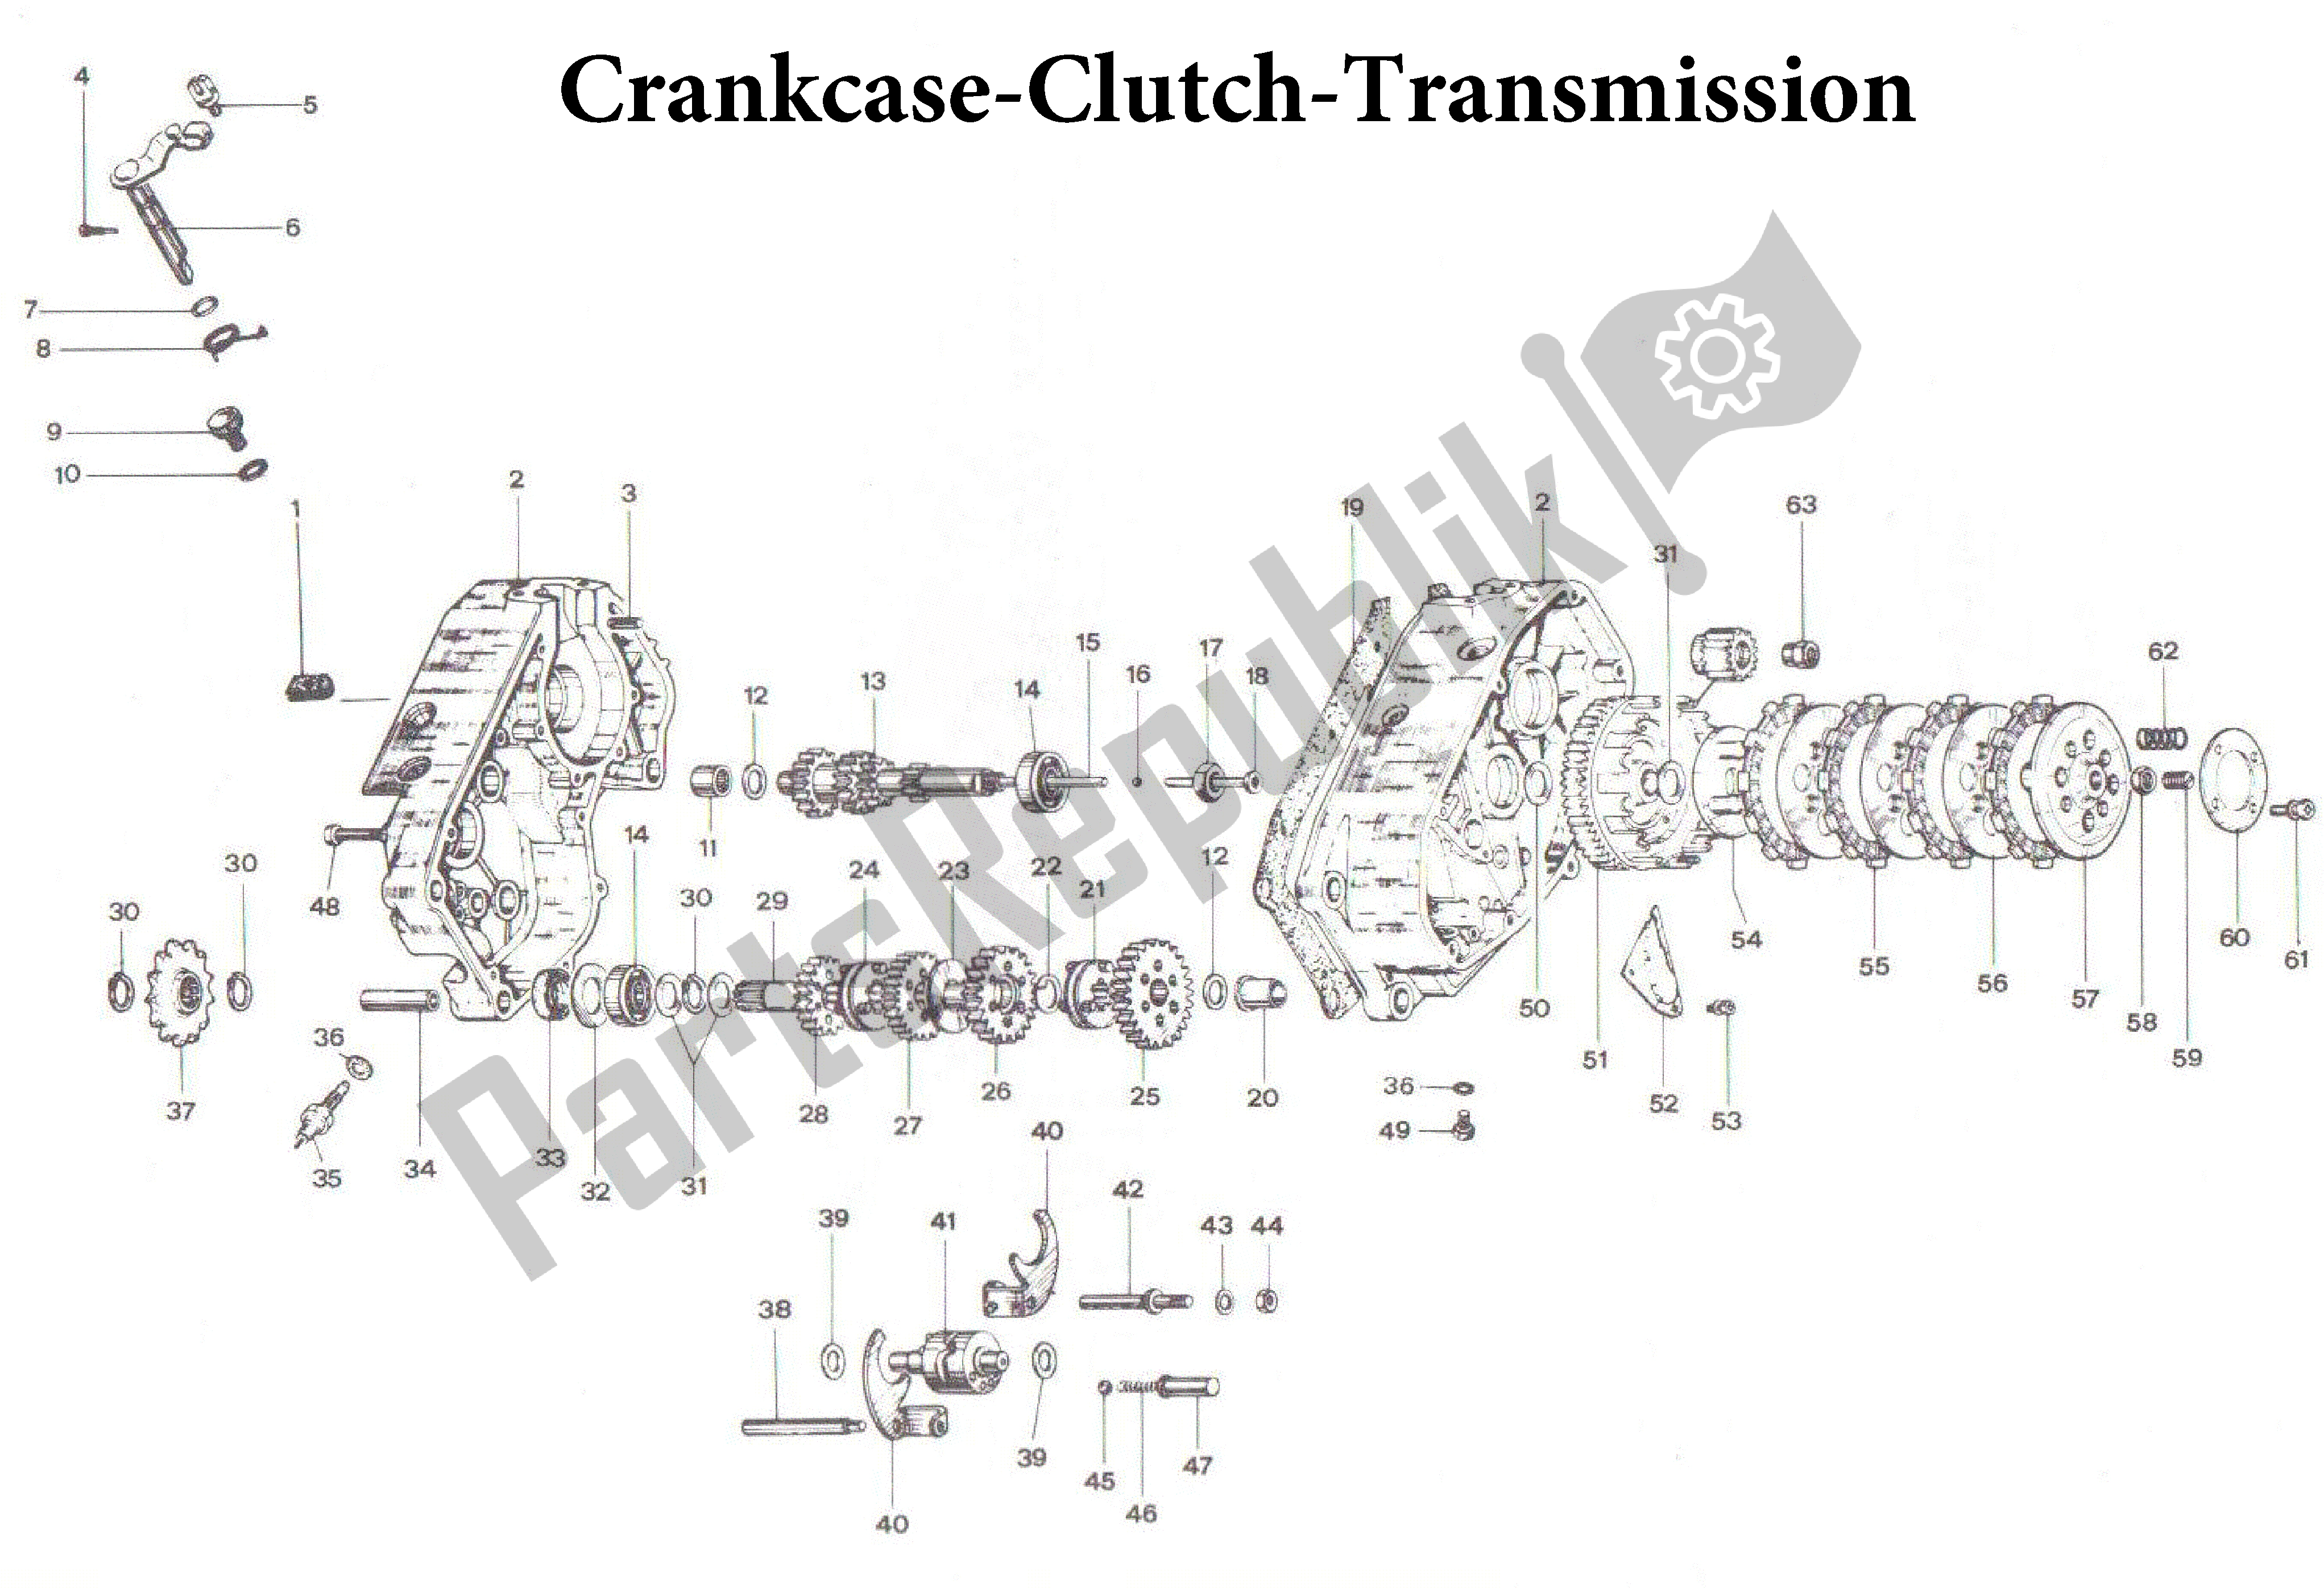 All parts for the Crankcase-clutch-transmission of the Aprilia RX 50 1990